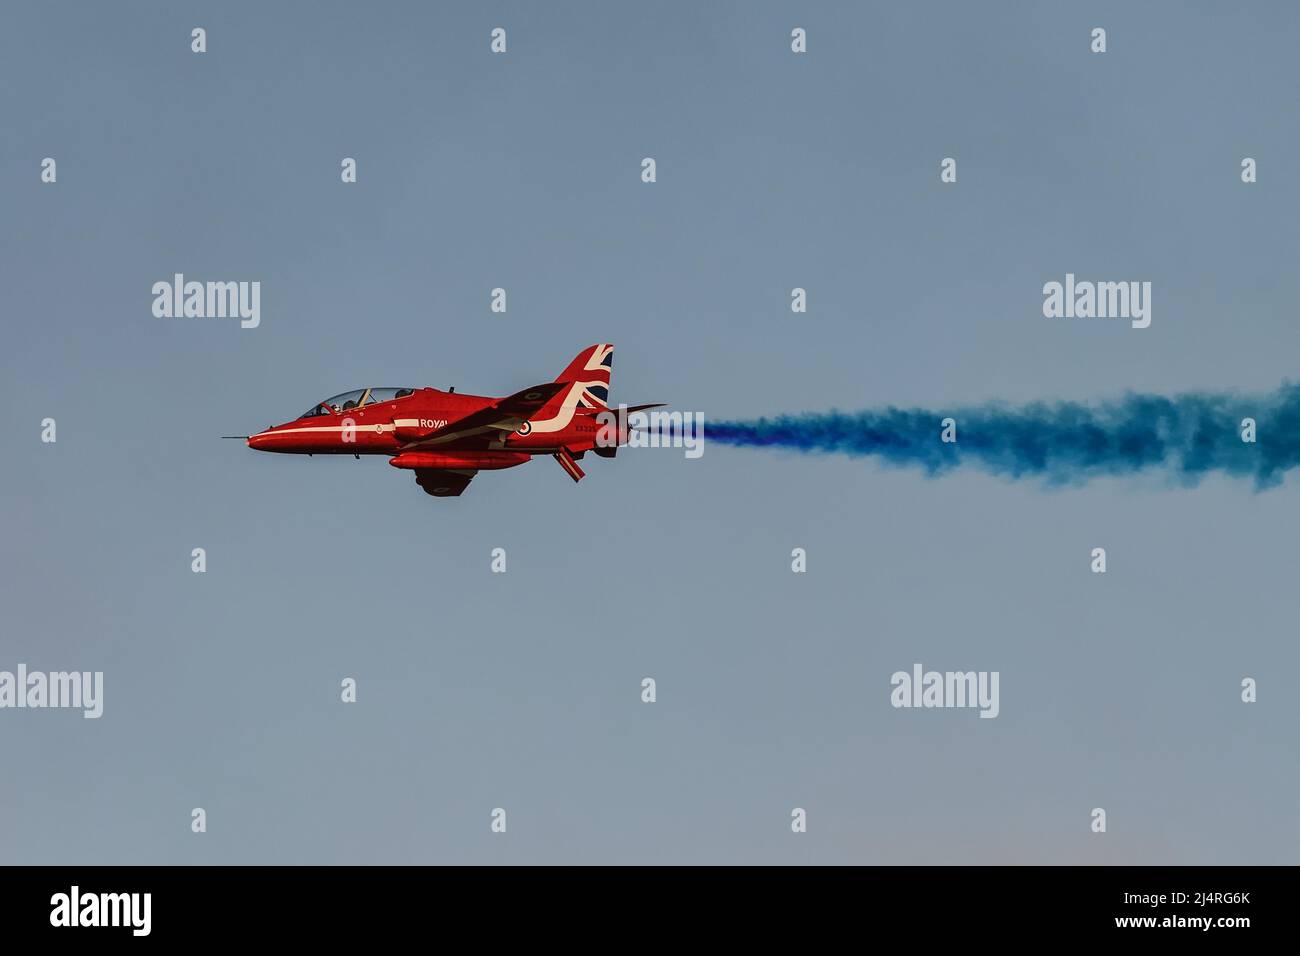 Gdynia, Poland - August 21, 2021: The Royal Air Force Aerobatic Team of the United Kingdom at the Aero Baltic show in Gdynia, Poland. Stock Photo